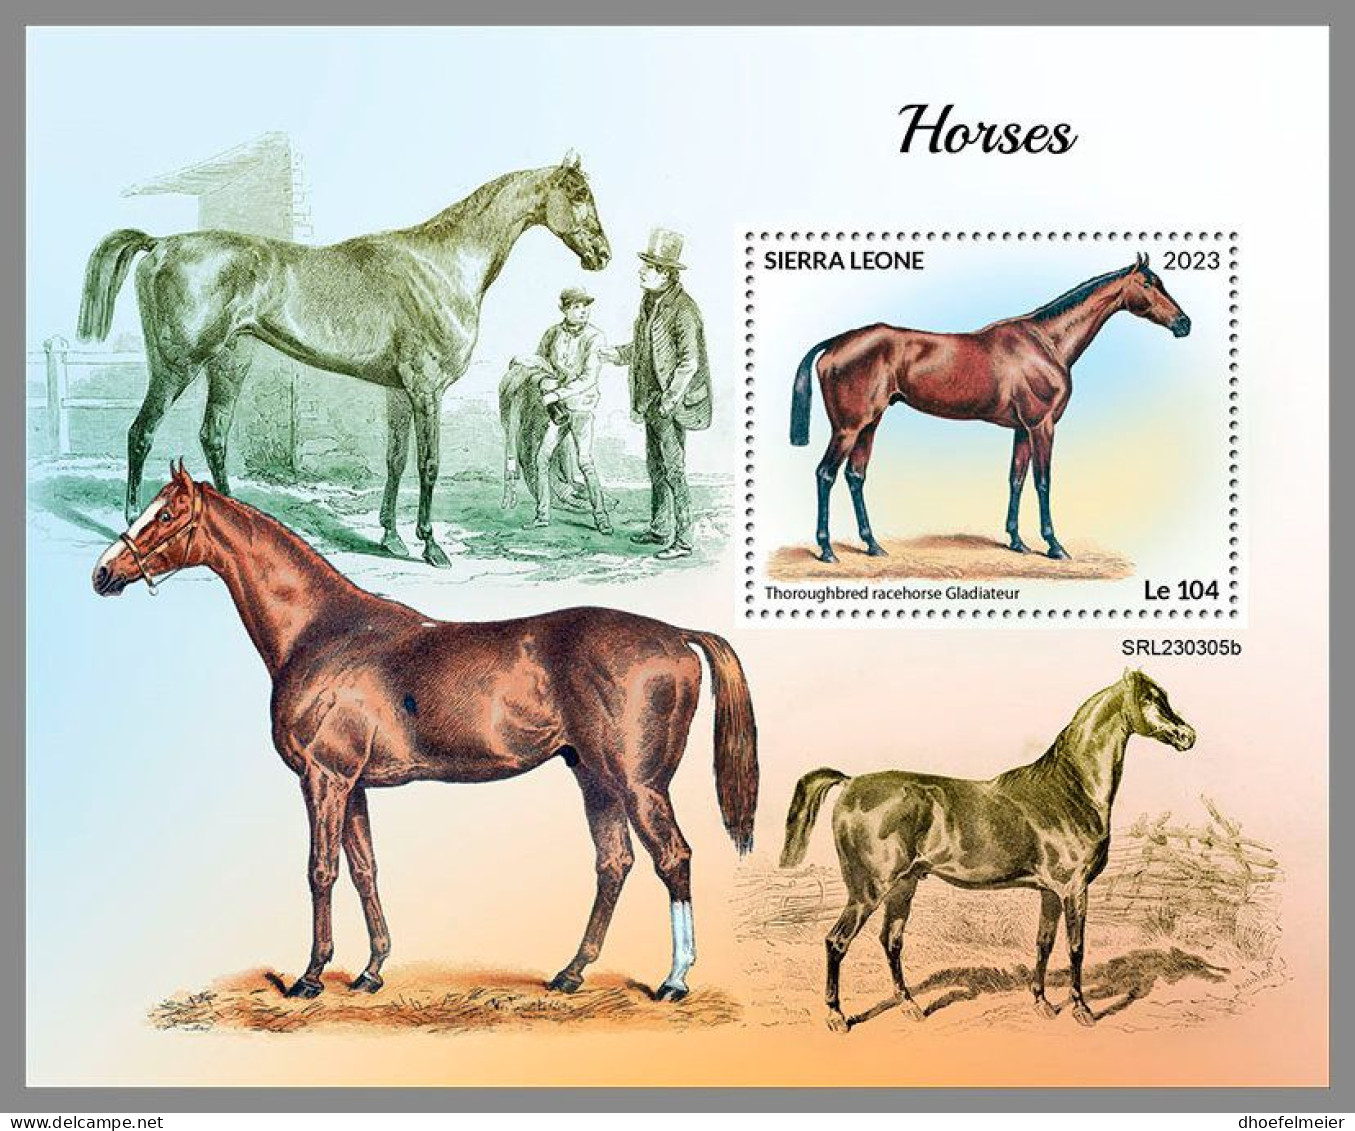 SIERRA LEONE 2023 MNH Horses Pferde S/S – OFFICIAL ISSUE – DHQ2418 - Chevaux